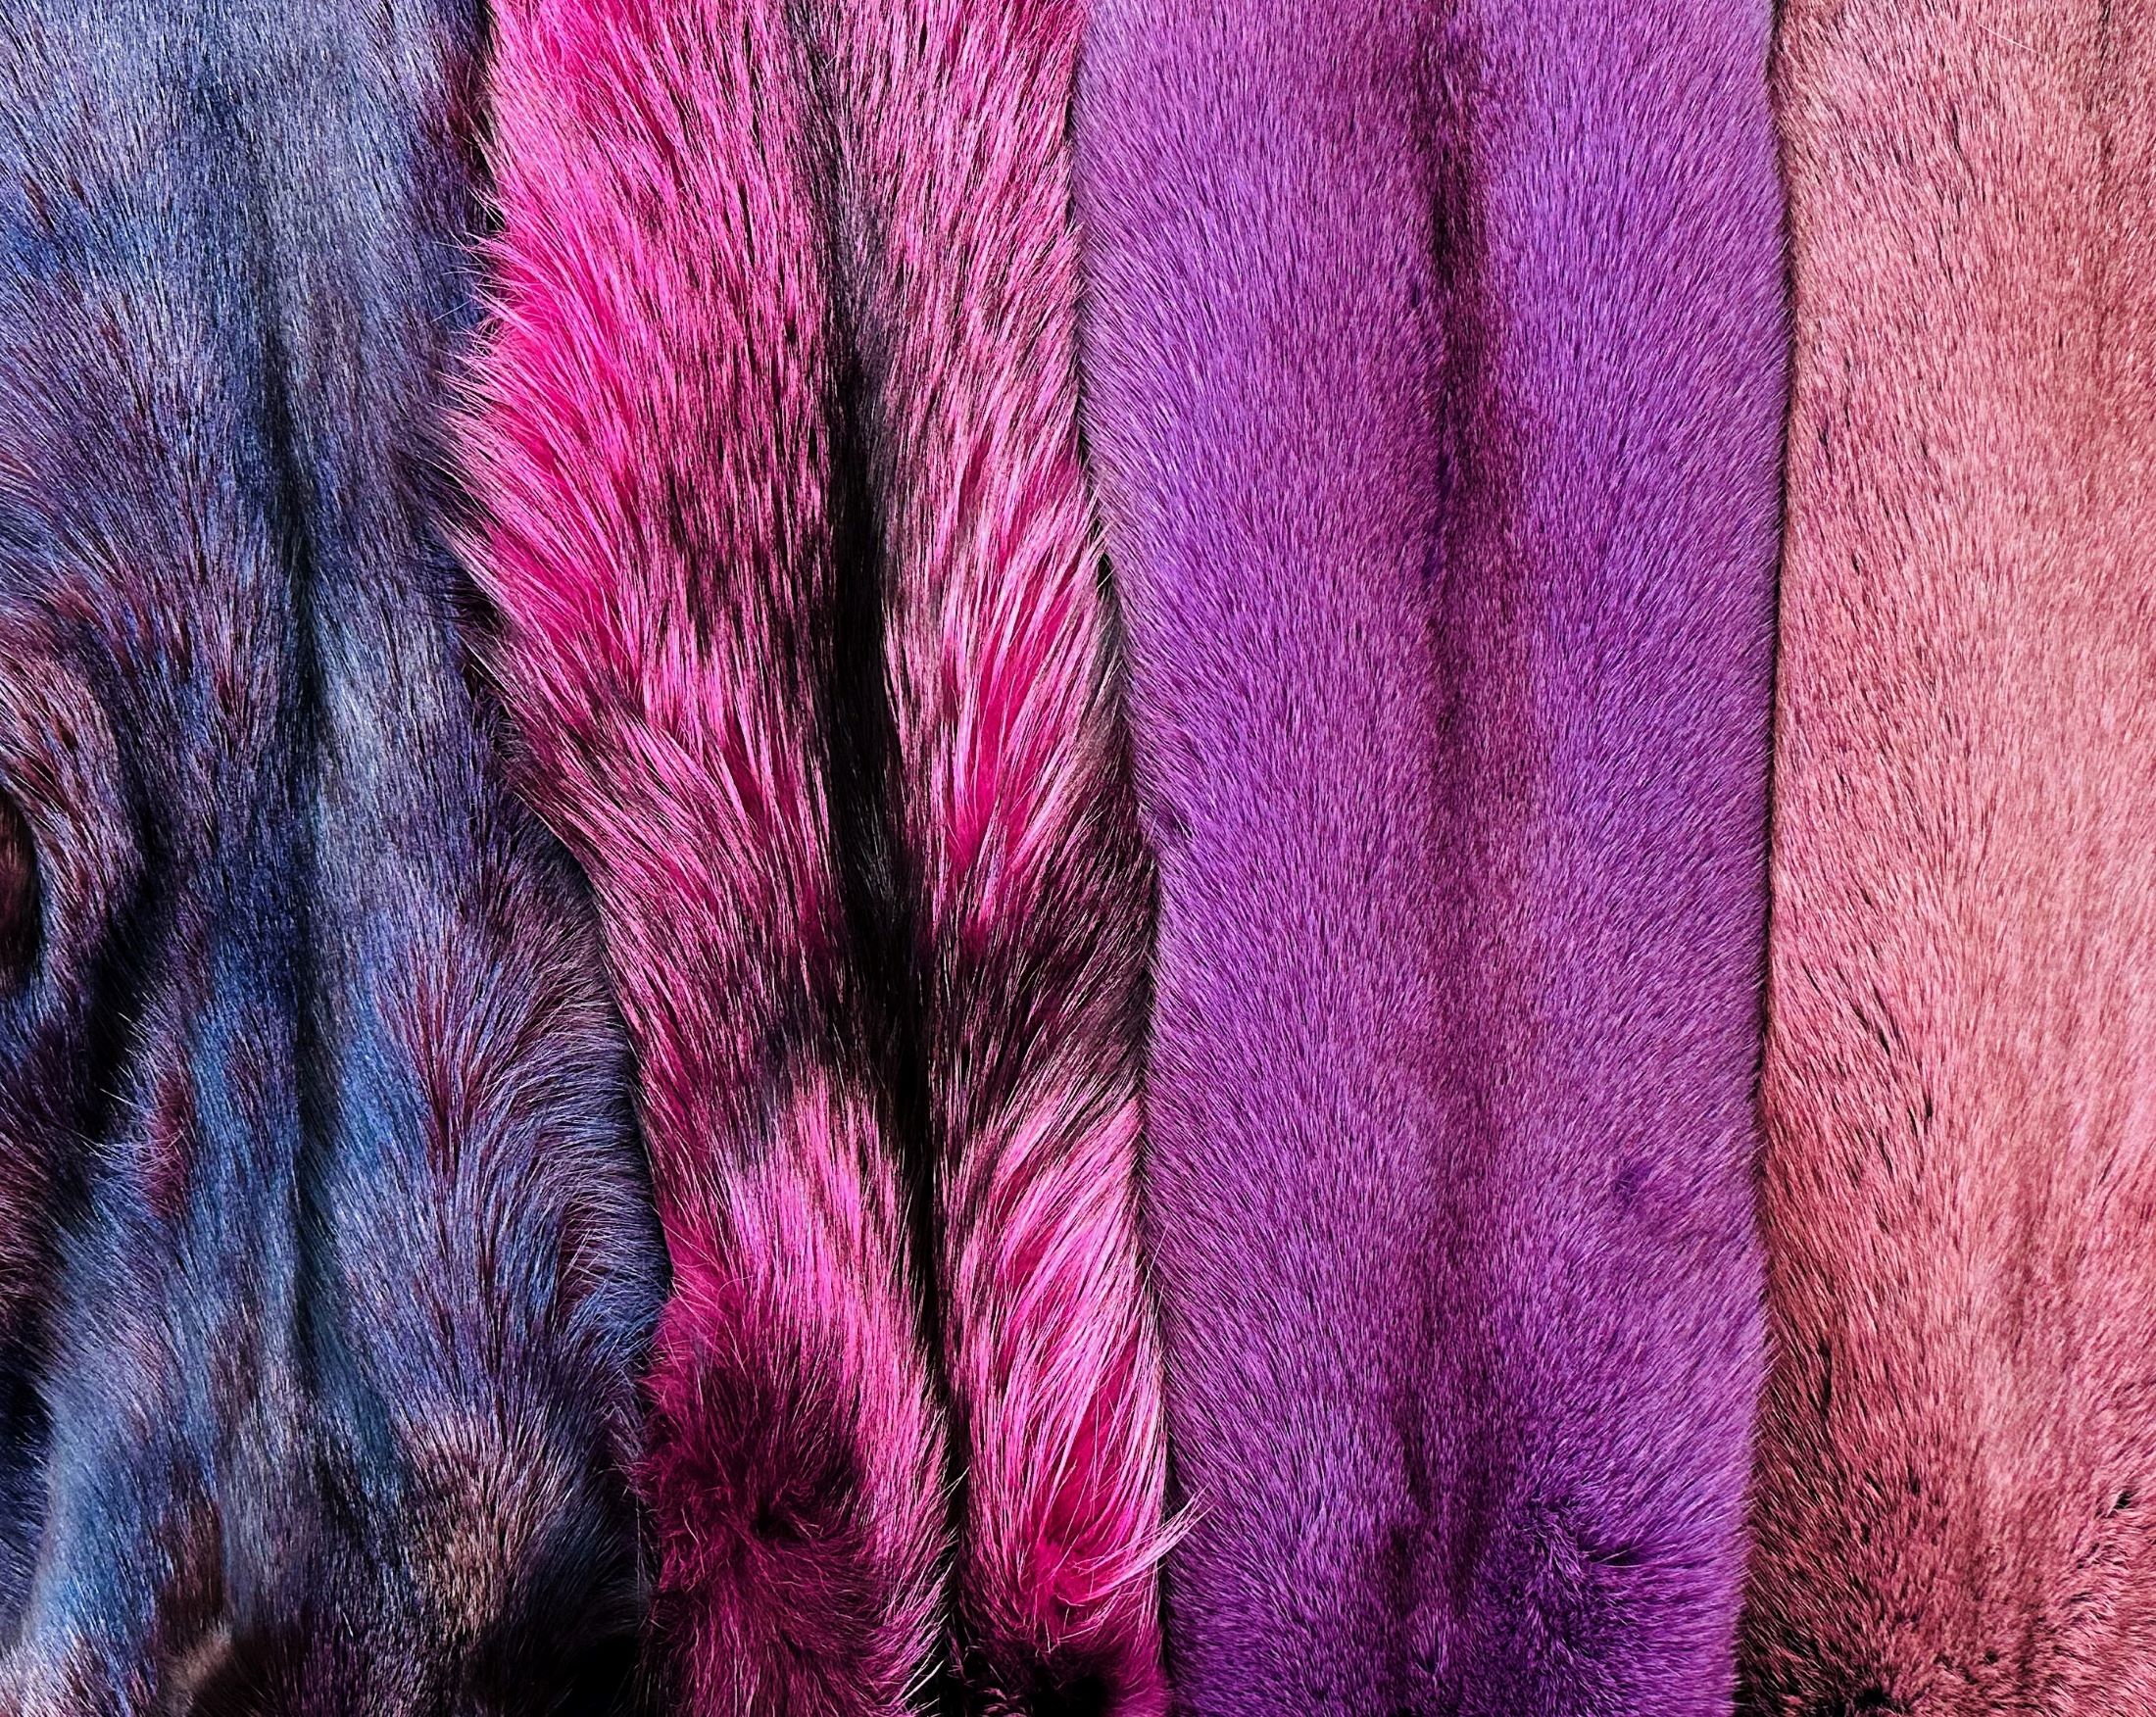 Fox furs dyed many shades of purple